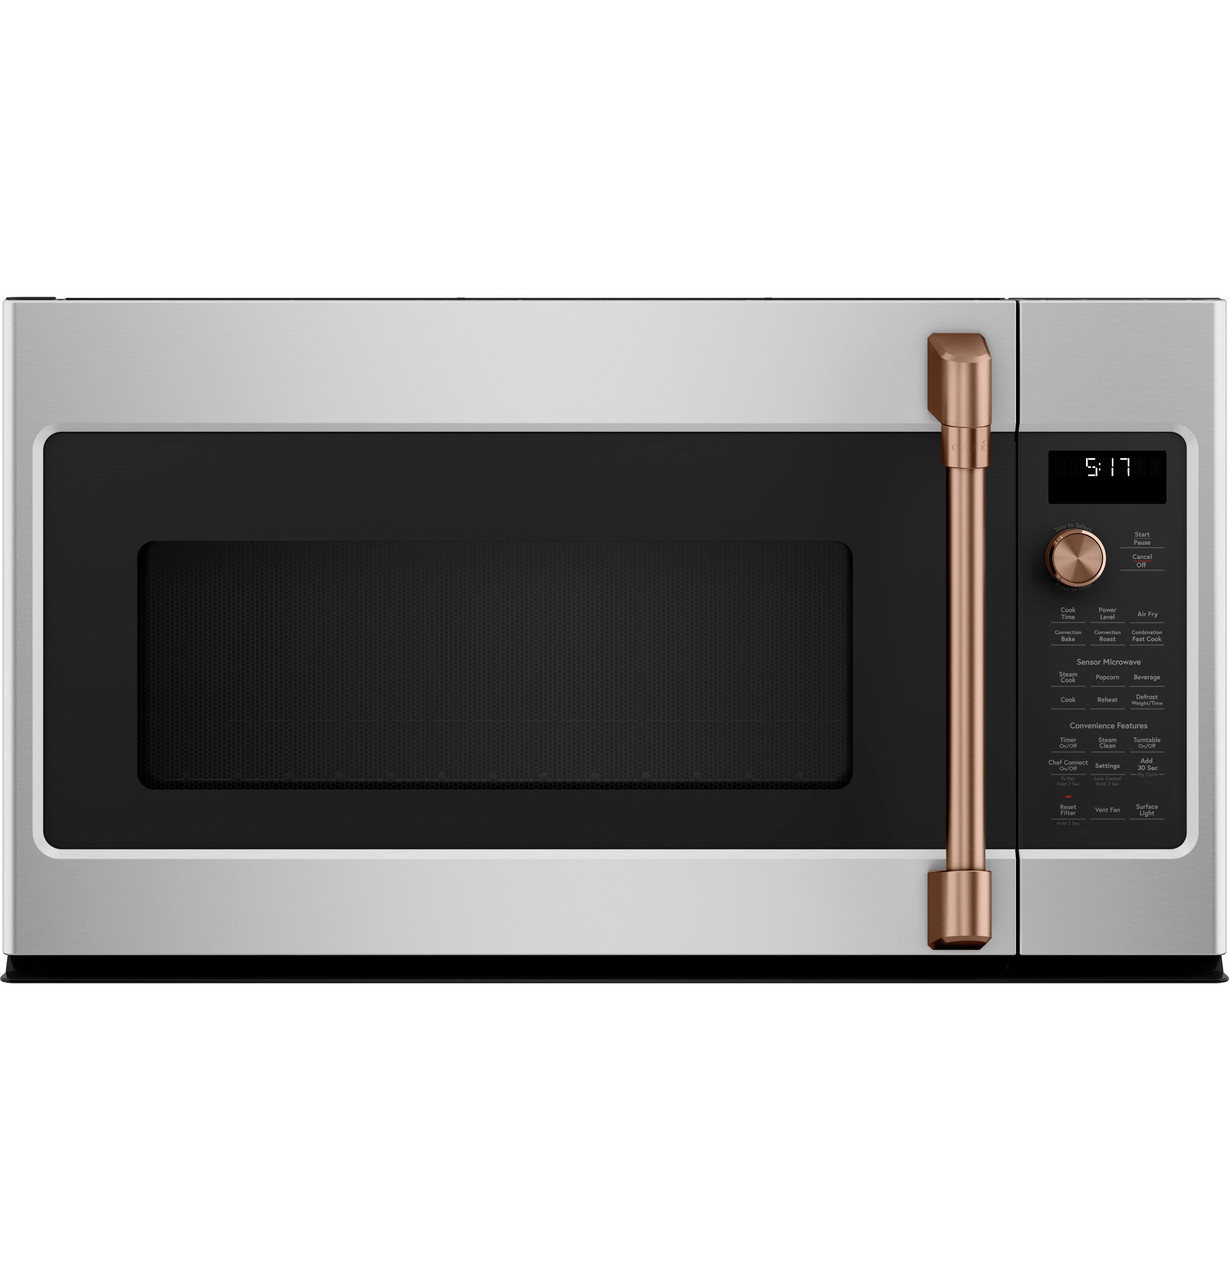 GE® Countertop Convection Microwave Oven with Air Fry and Broil